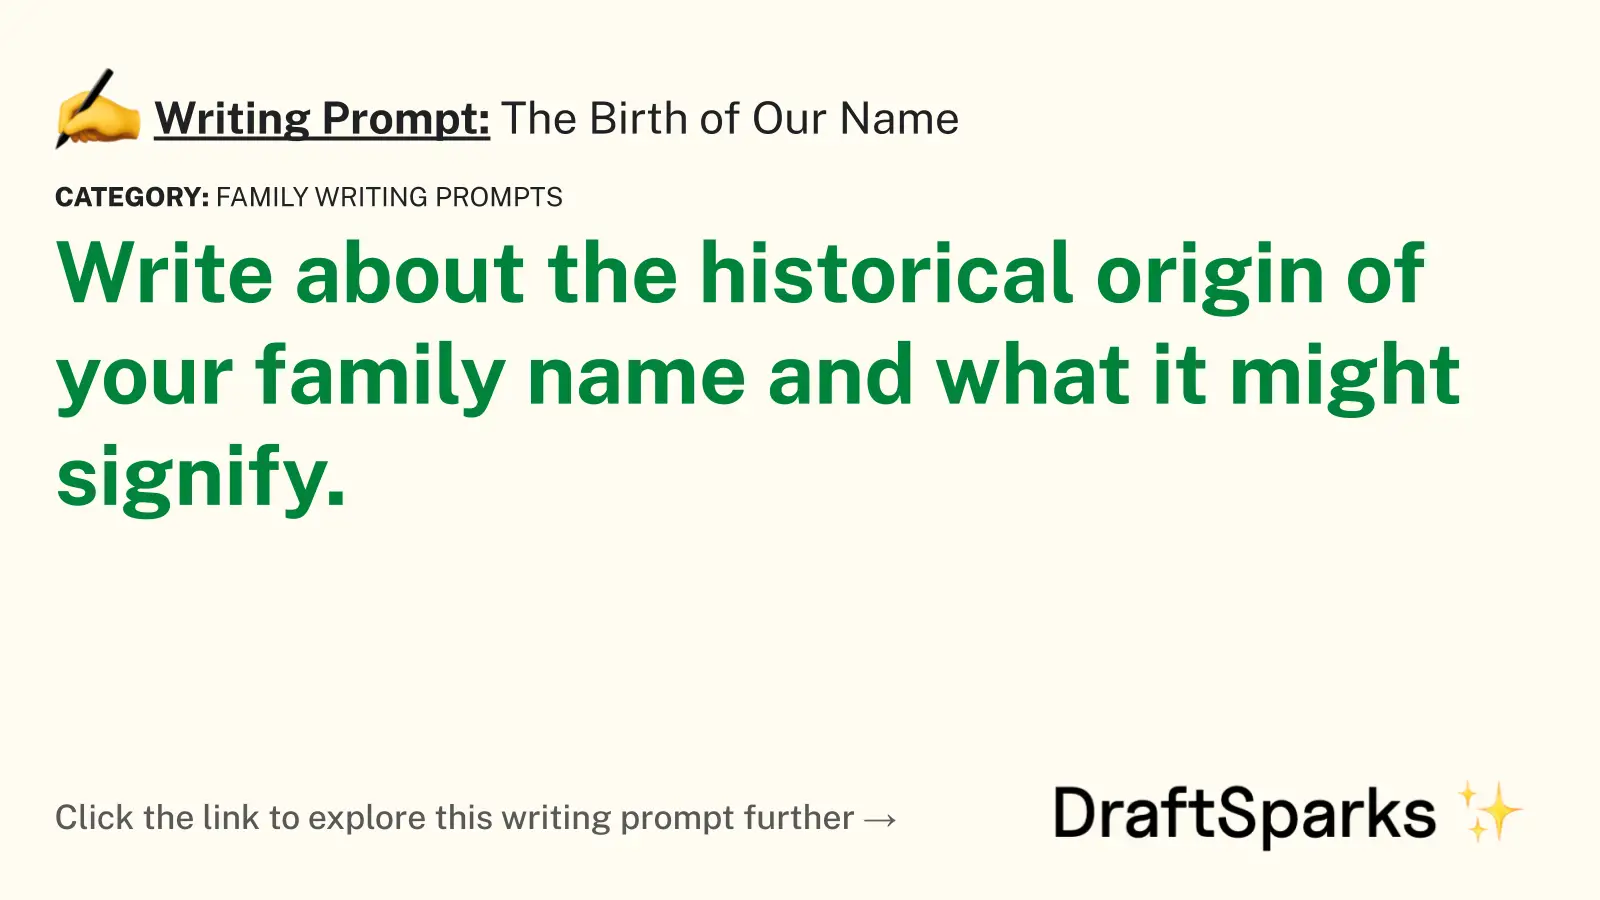 The Birth of Our Name